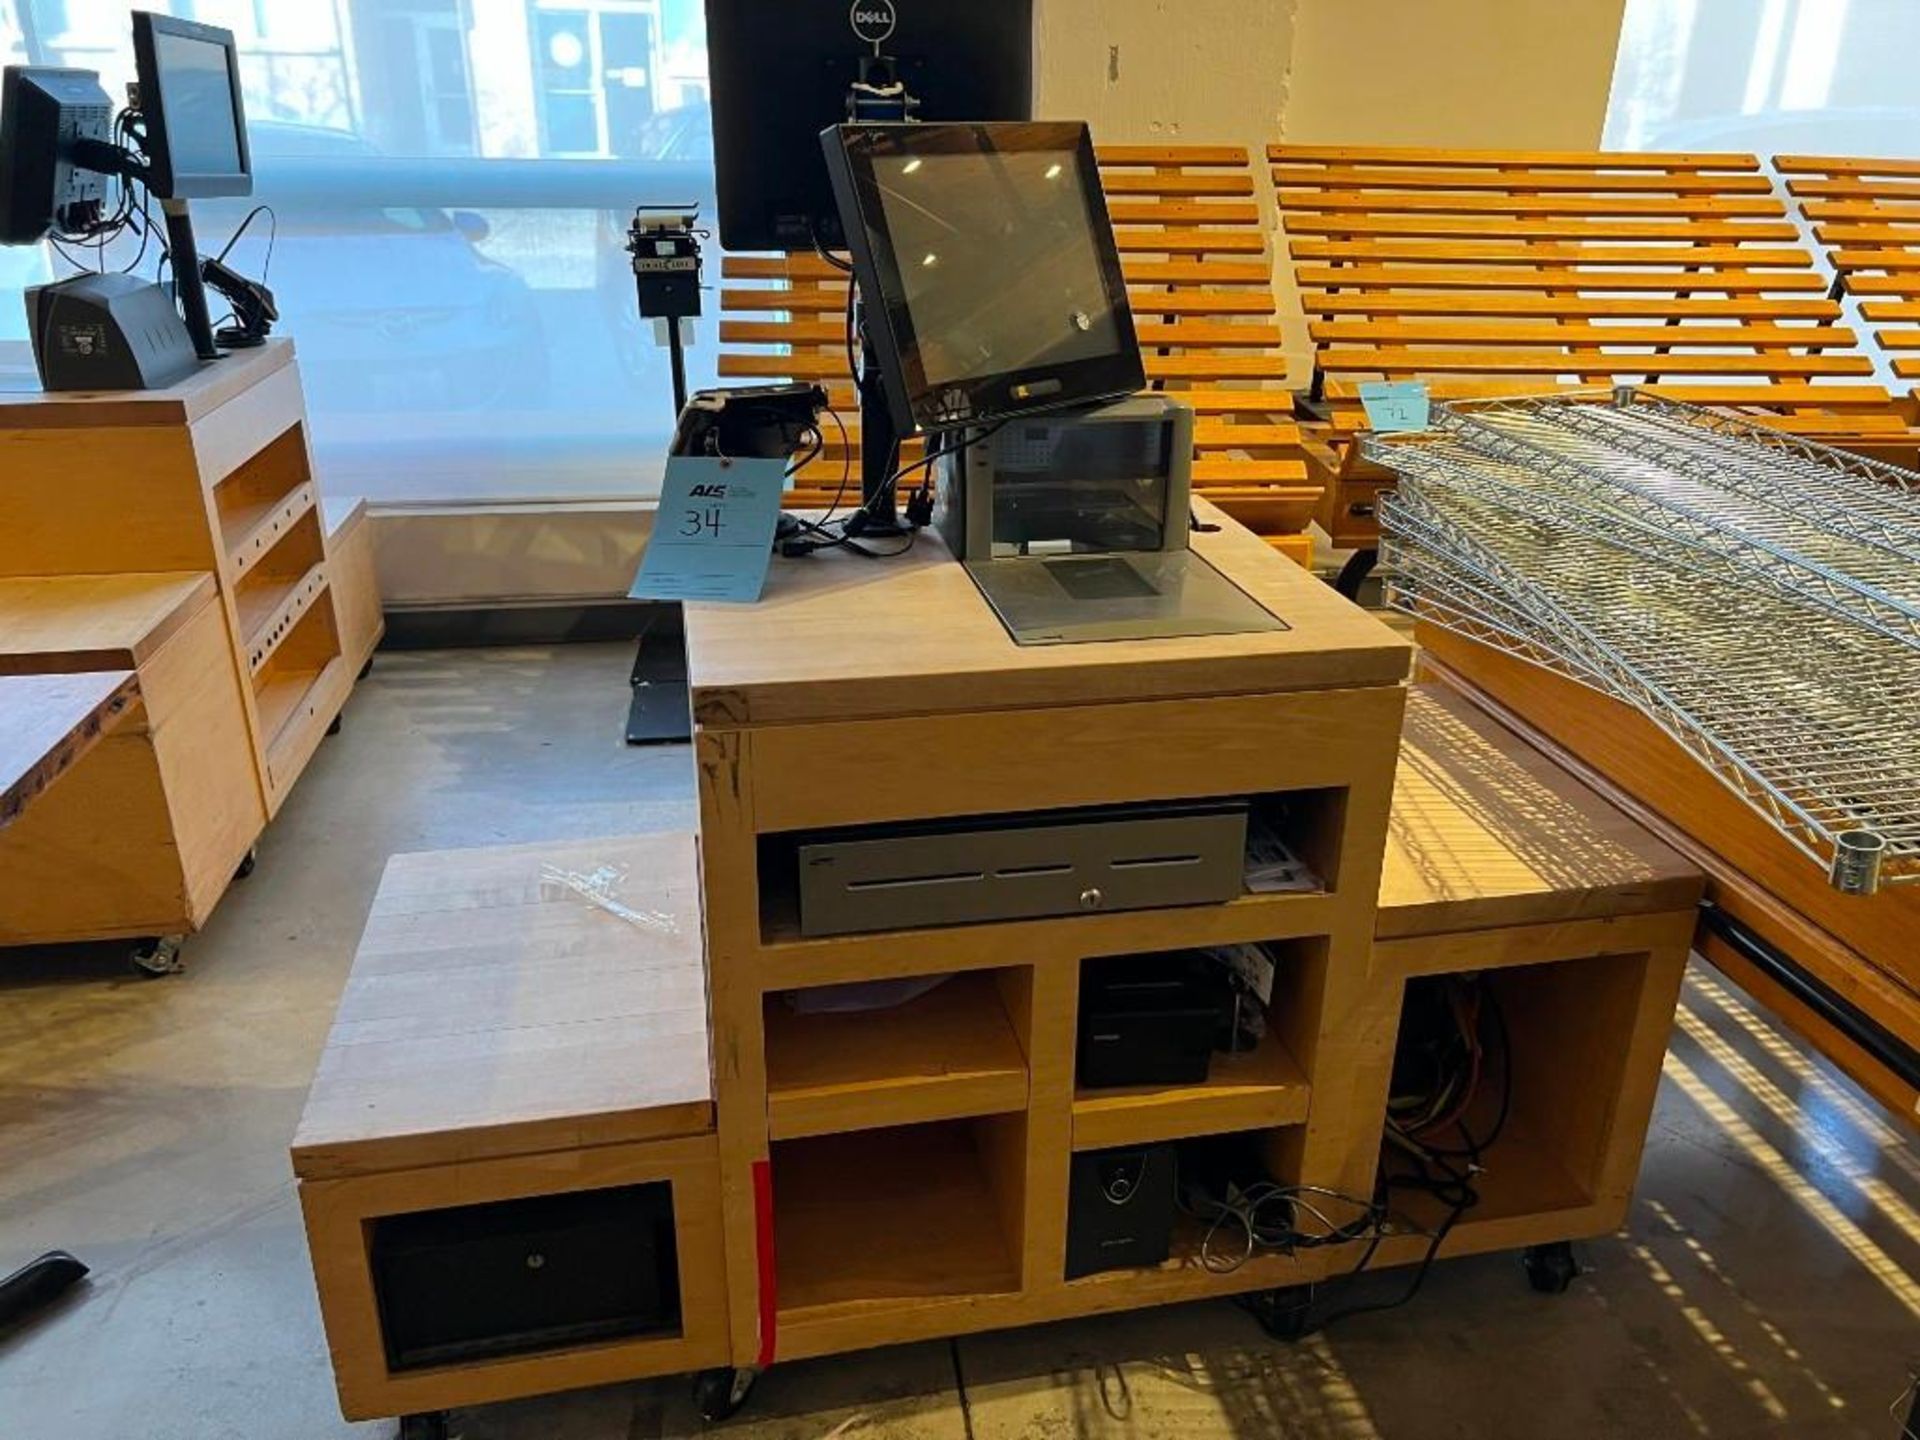 LOT: ECRS Point-of-Sale (POS) System, including: ECRS Freedom Panel touch screen, Epson Printer, Pow - Image 4 of 11